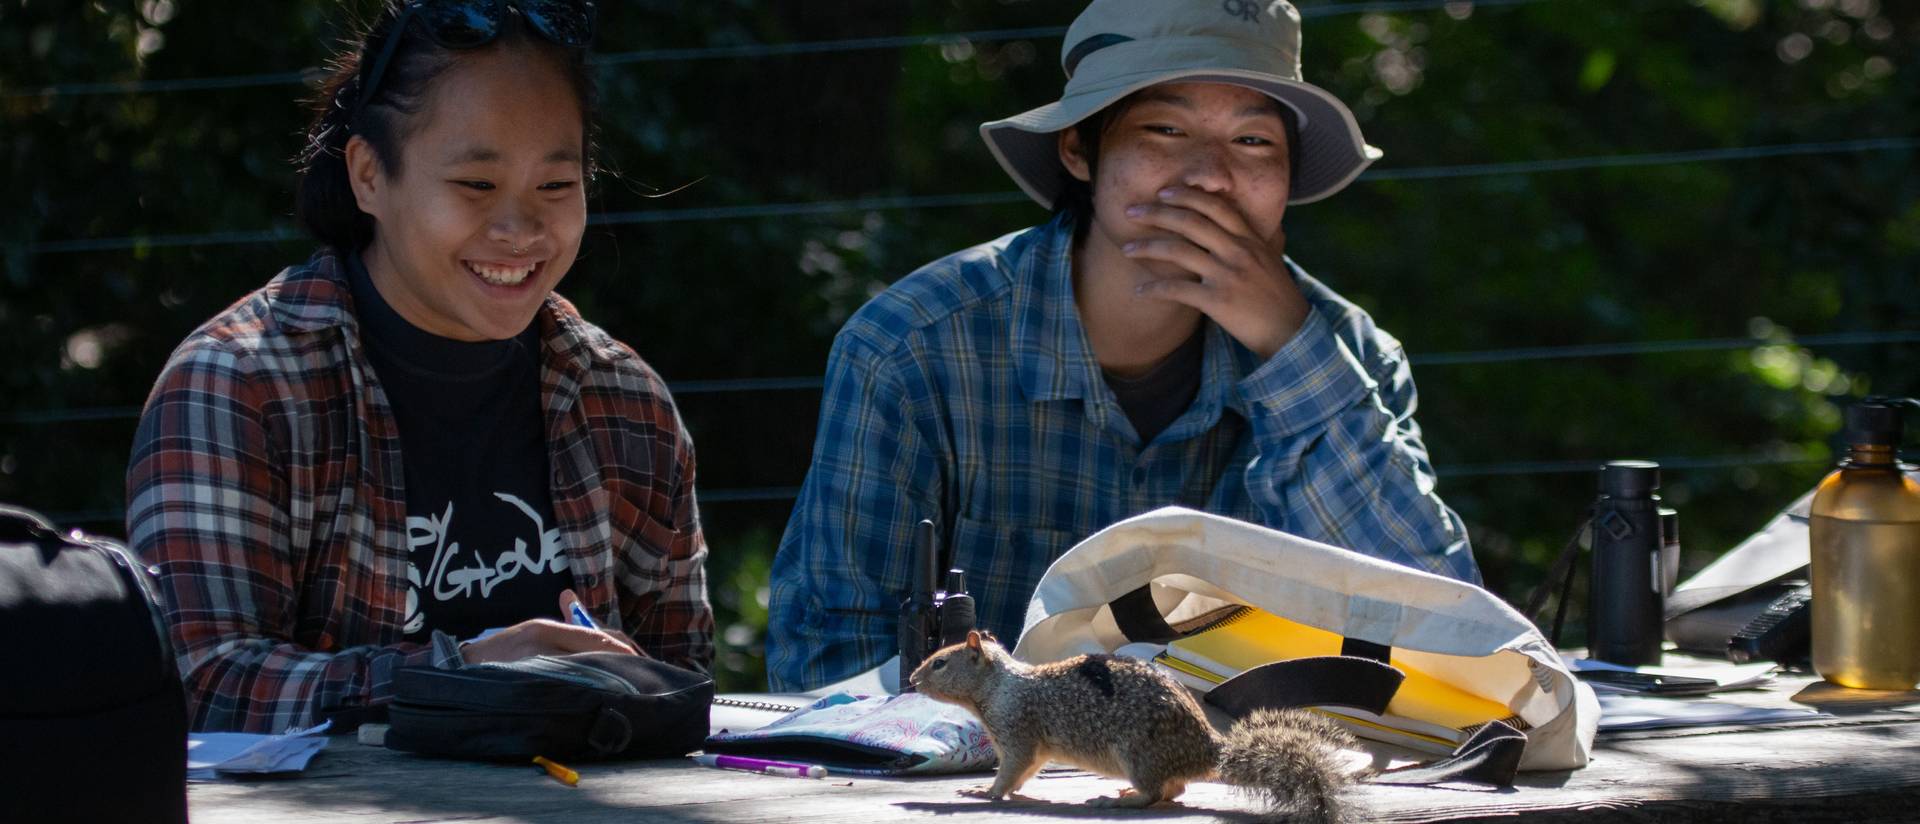 two students working at an outdoor table, a squirrel is on the table; surprised and laughing faces on the students